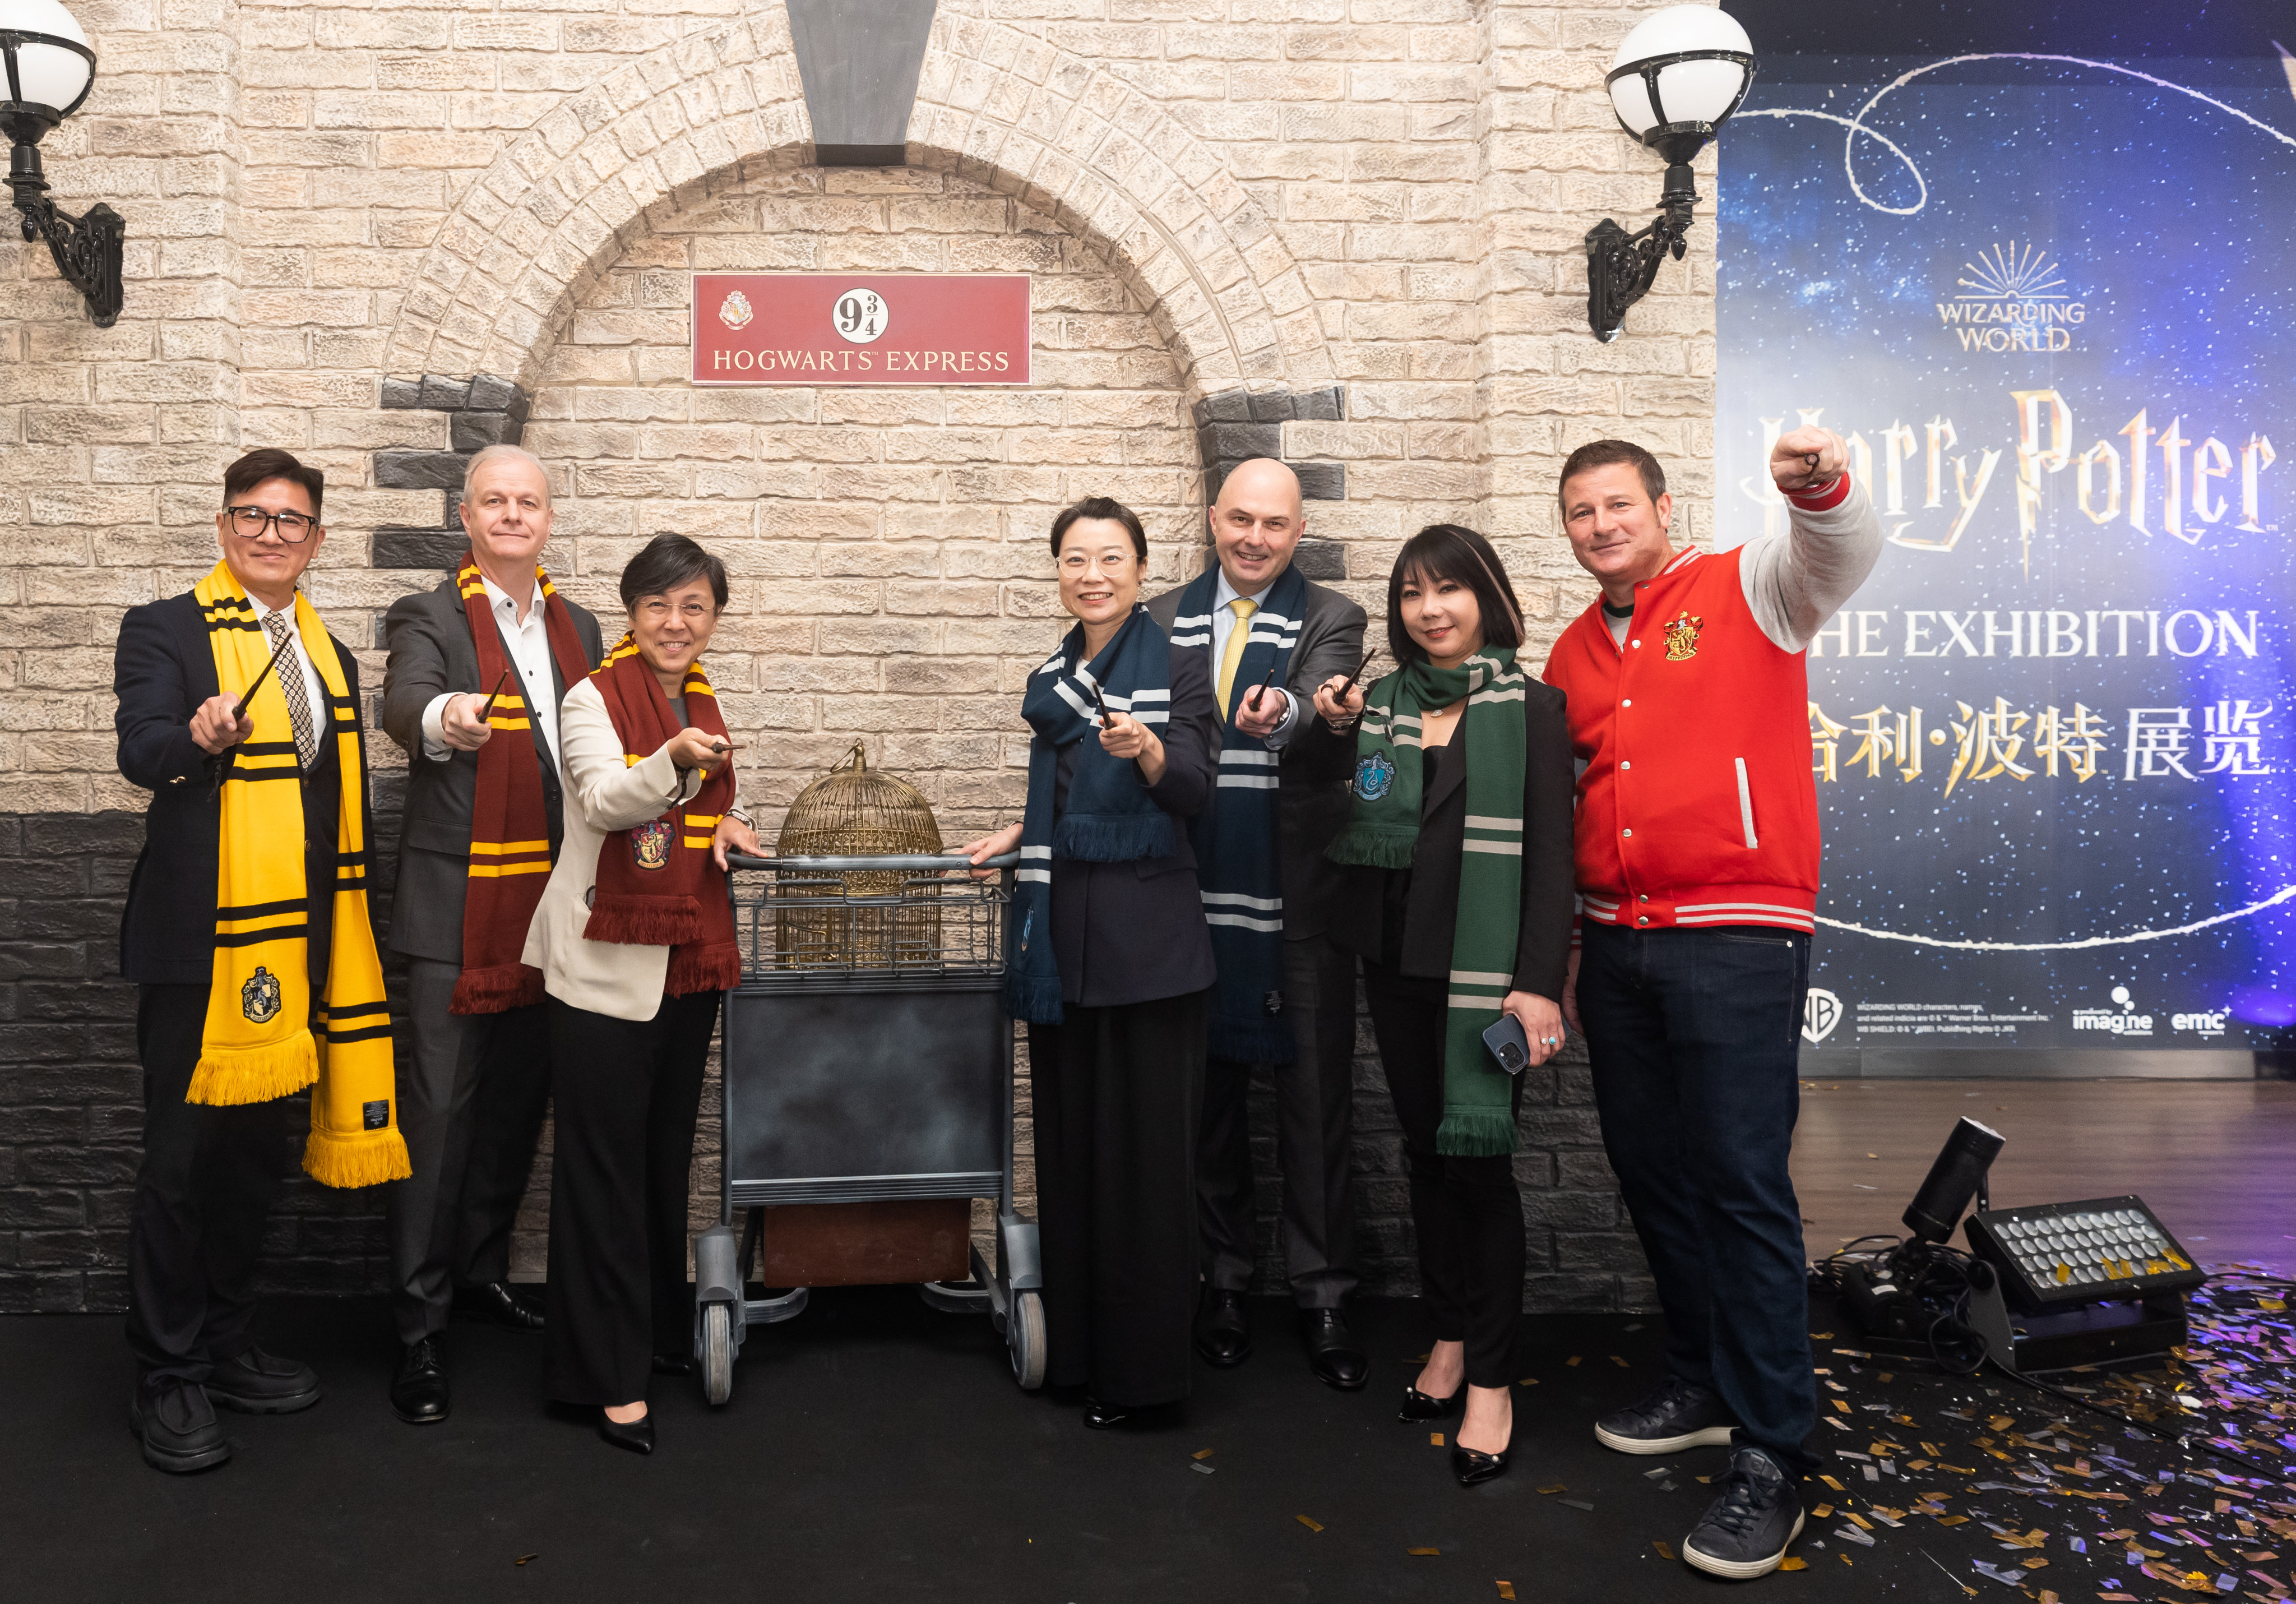 A new Harry Potter exhibition at The Londoner in Macau offers “a unique experience that connects the fans” with a world that they love. Photo: Harry Potter: The Exhibition